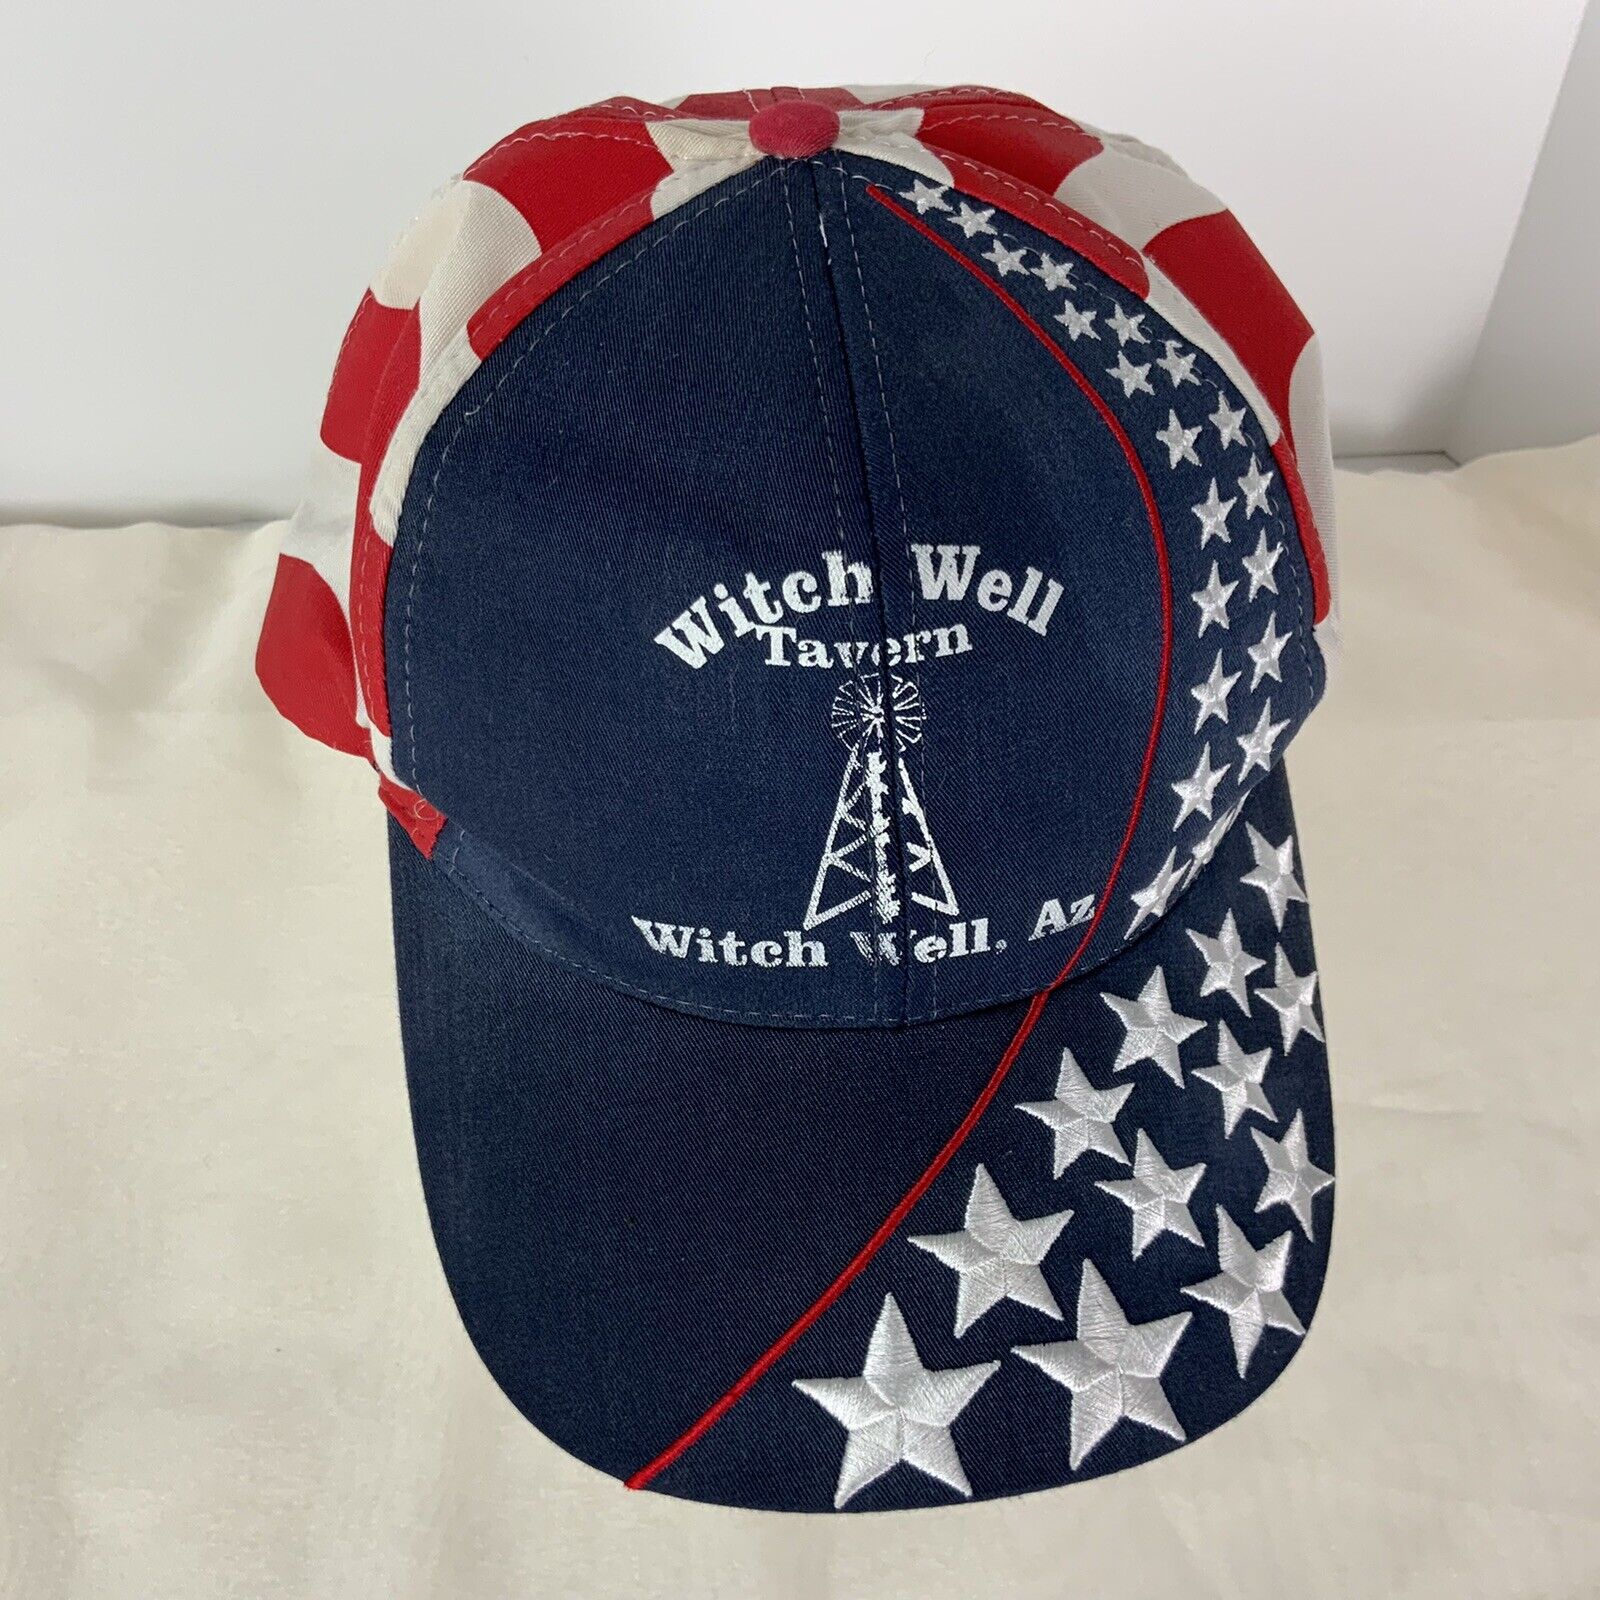 VTG Nissan Witch Well Tavern AZ Red White Blue Truckers Hat Metal Snap Closure